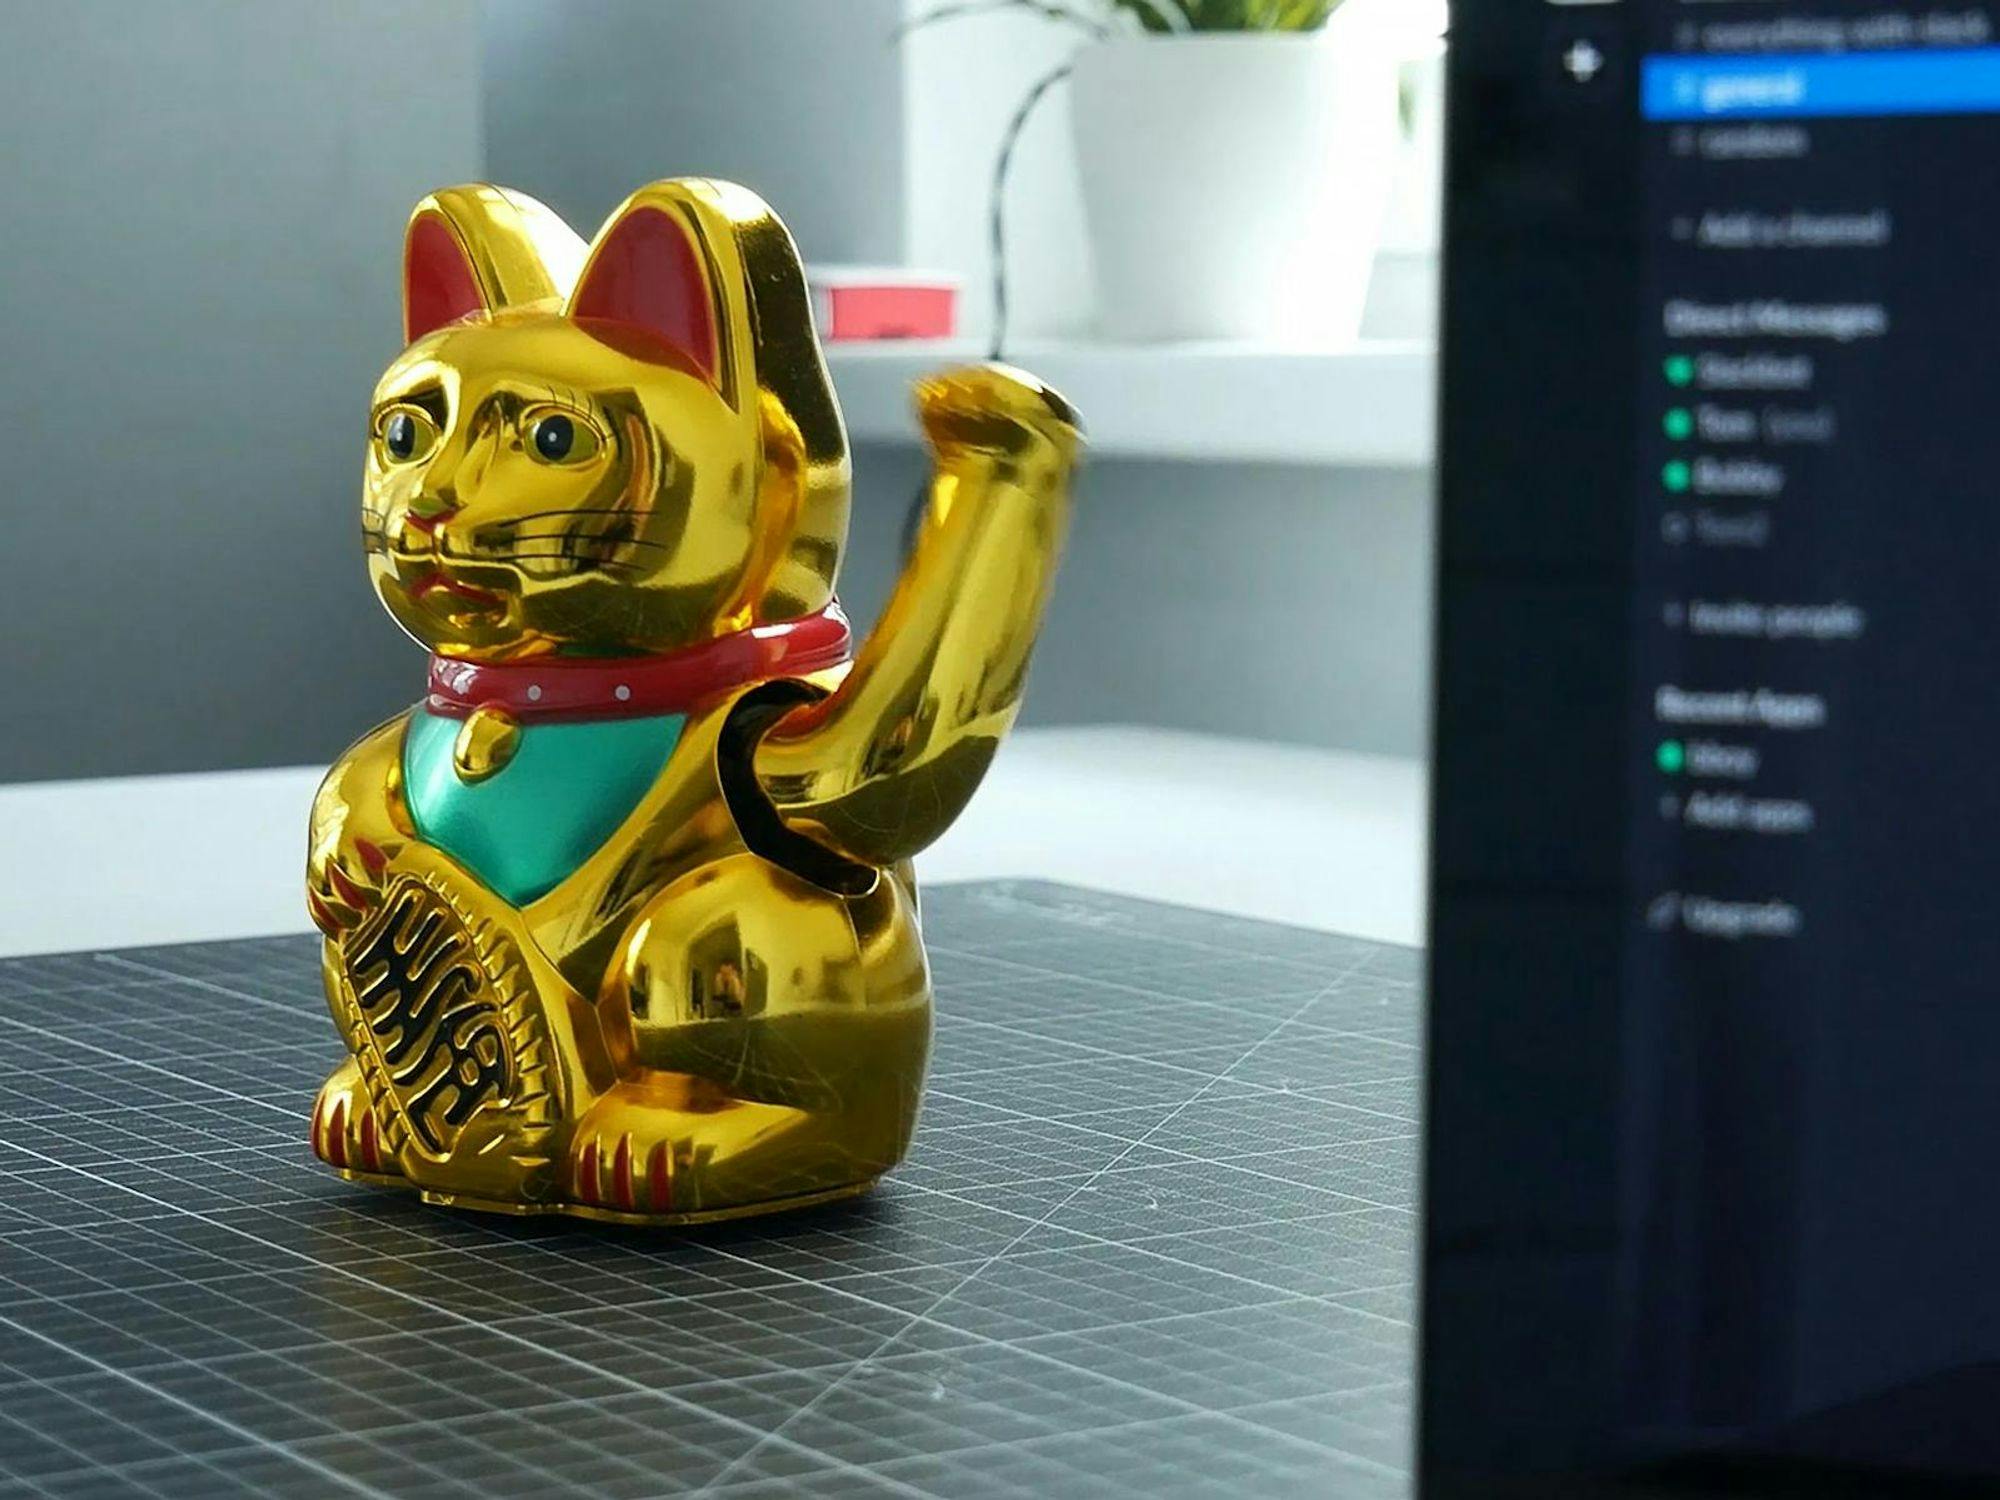 Meow - the Slack Bot with the Smart Paw